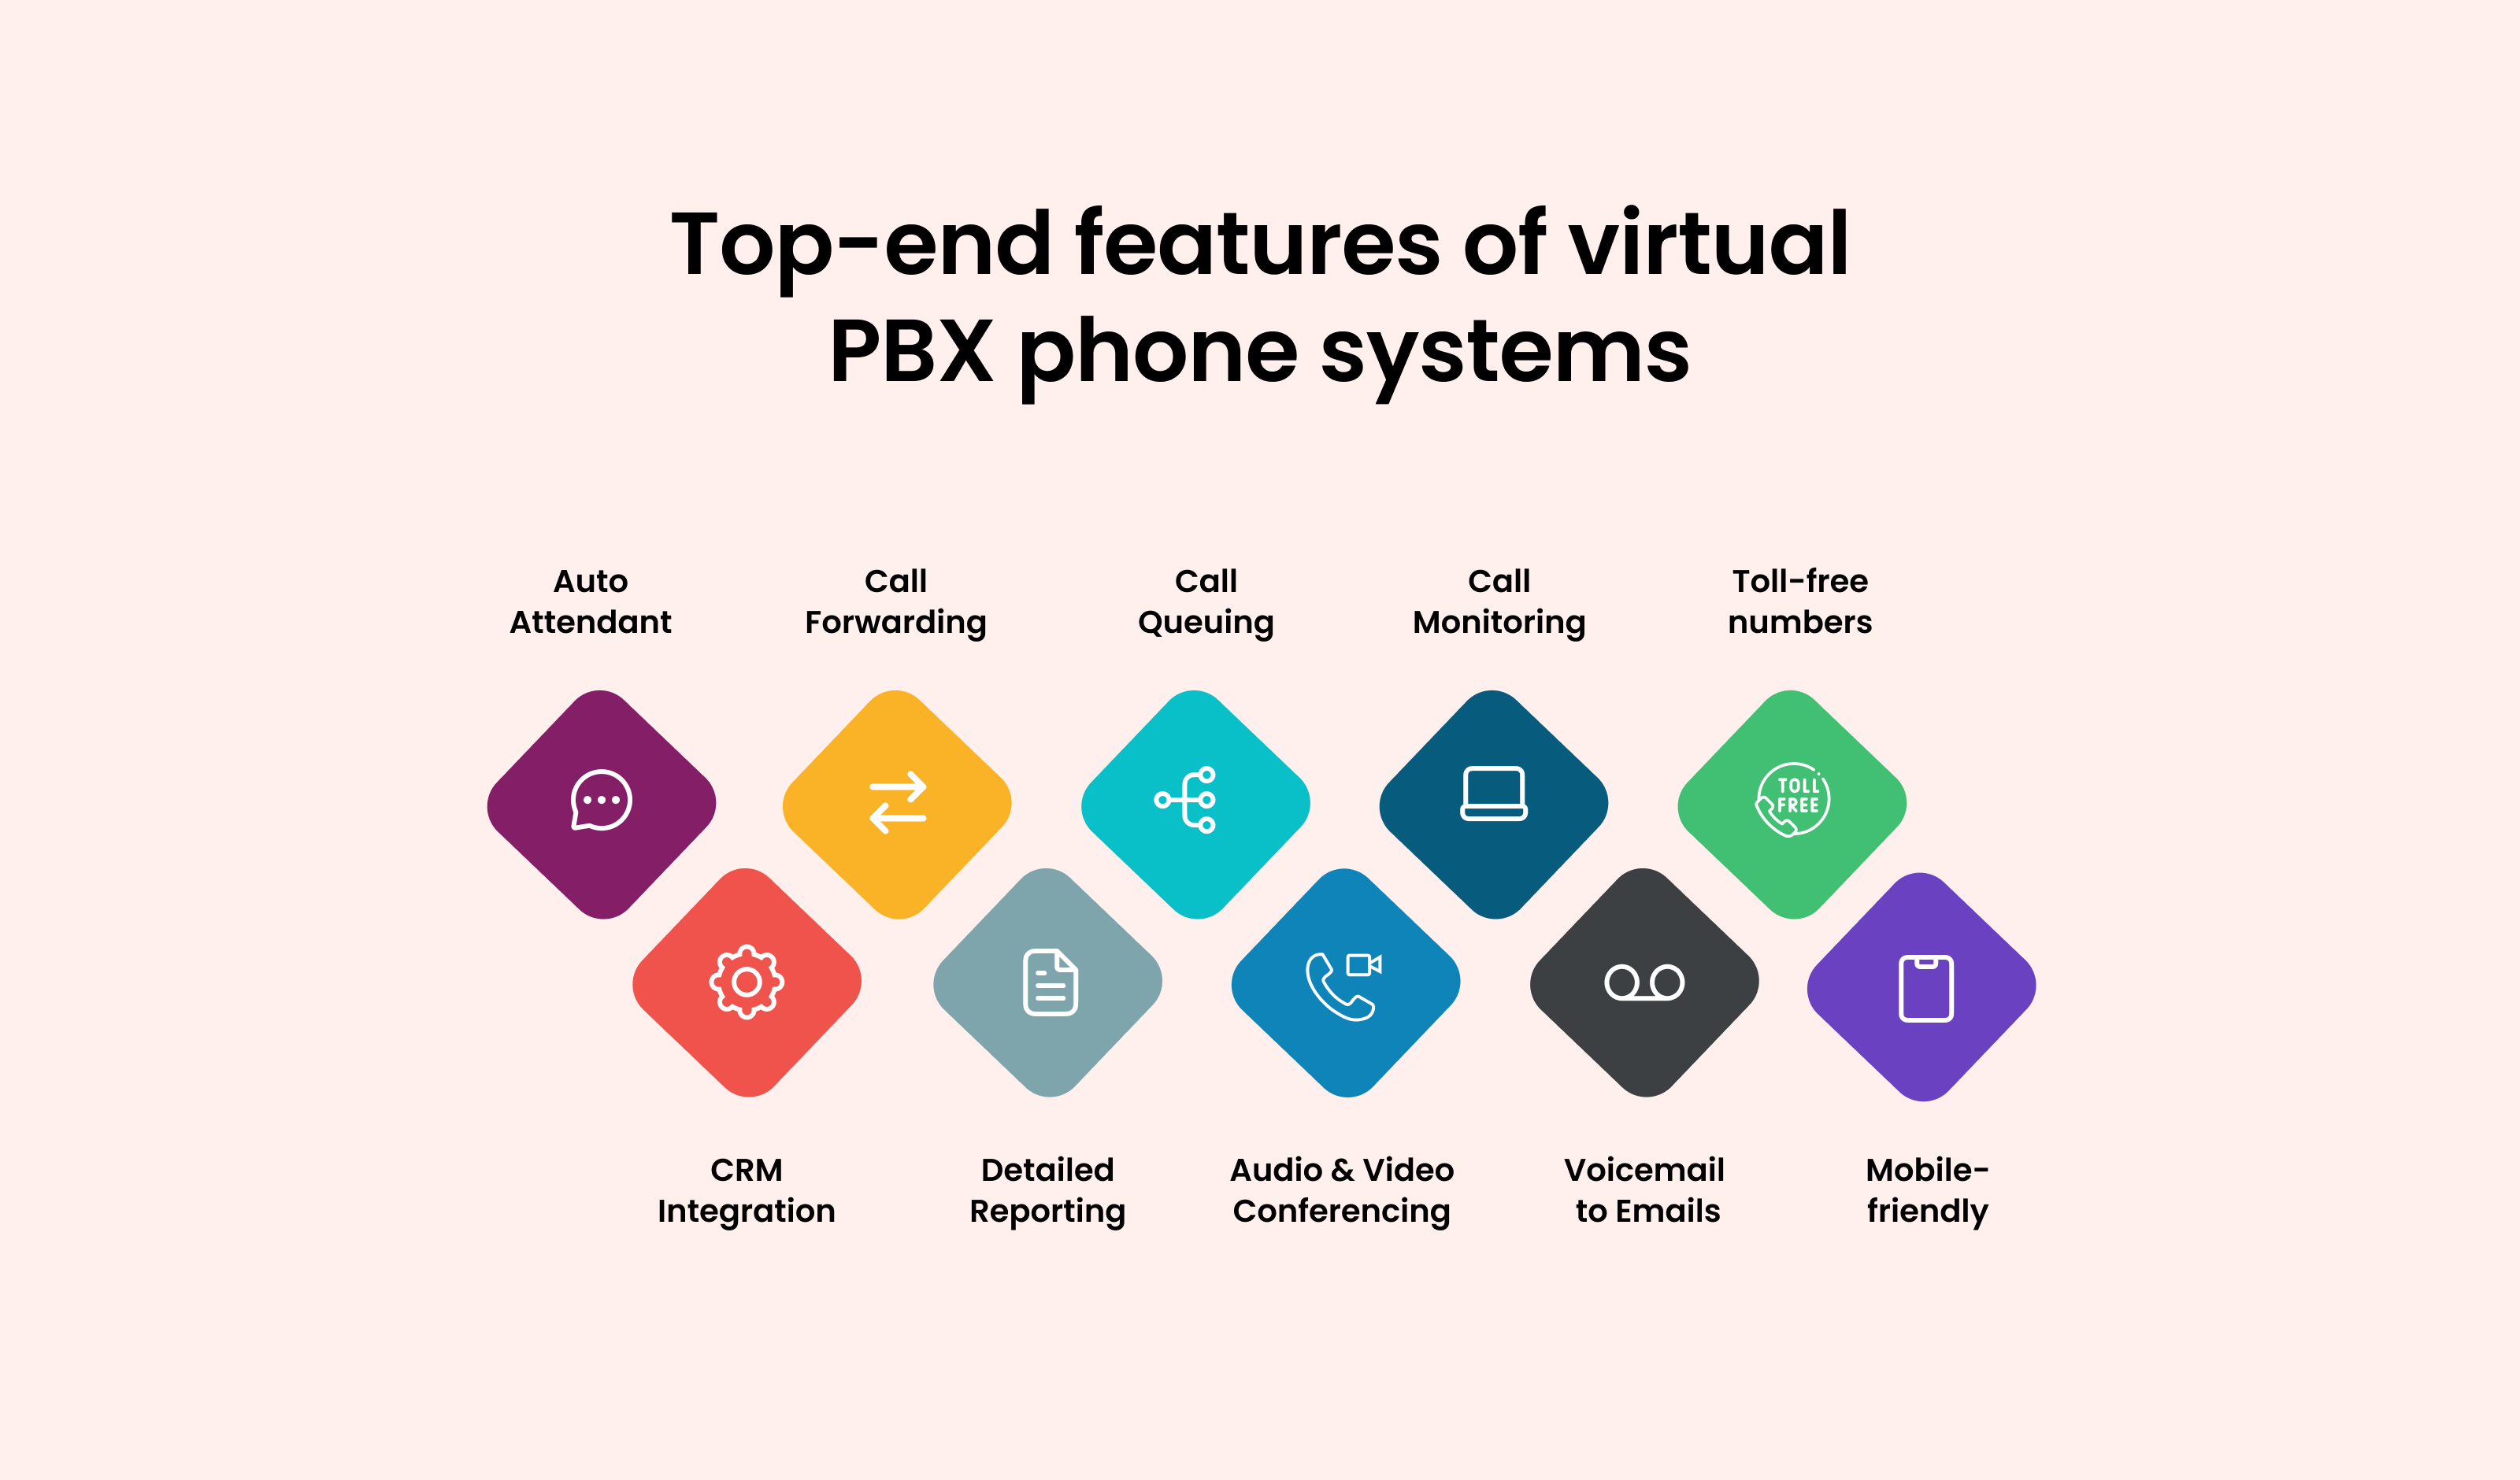 Top-end features of Virtual PBX Phone Systems: